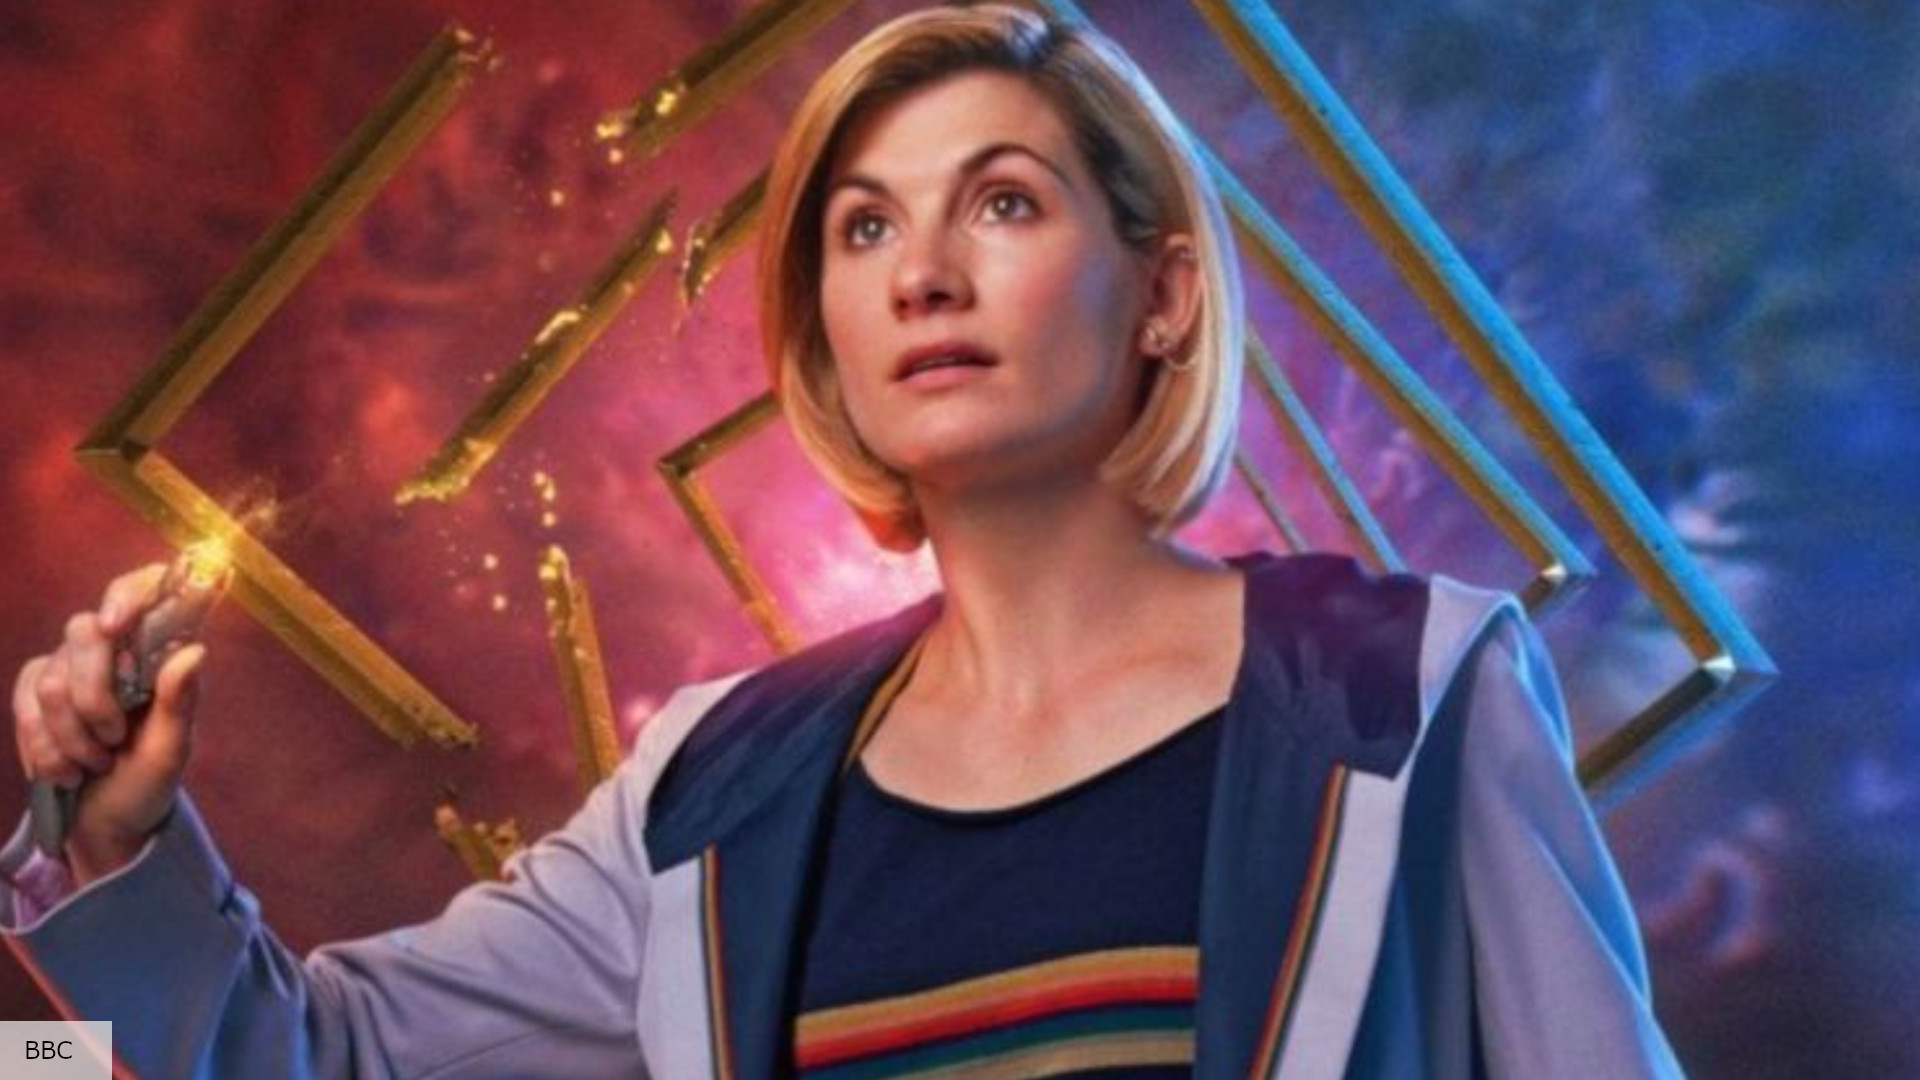 Doctor Who series 13 trailer promises “her biggest adventure yet”